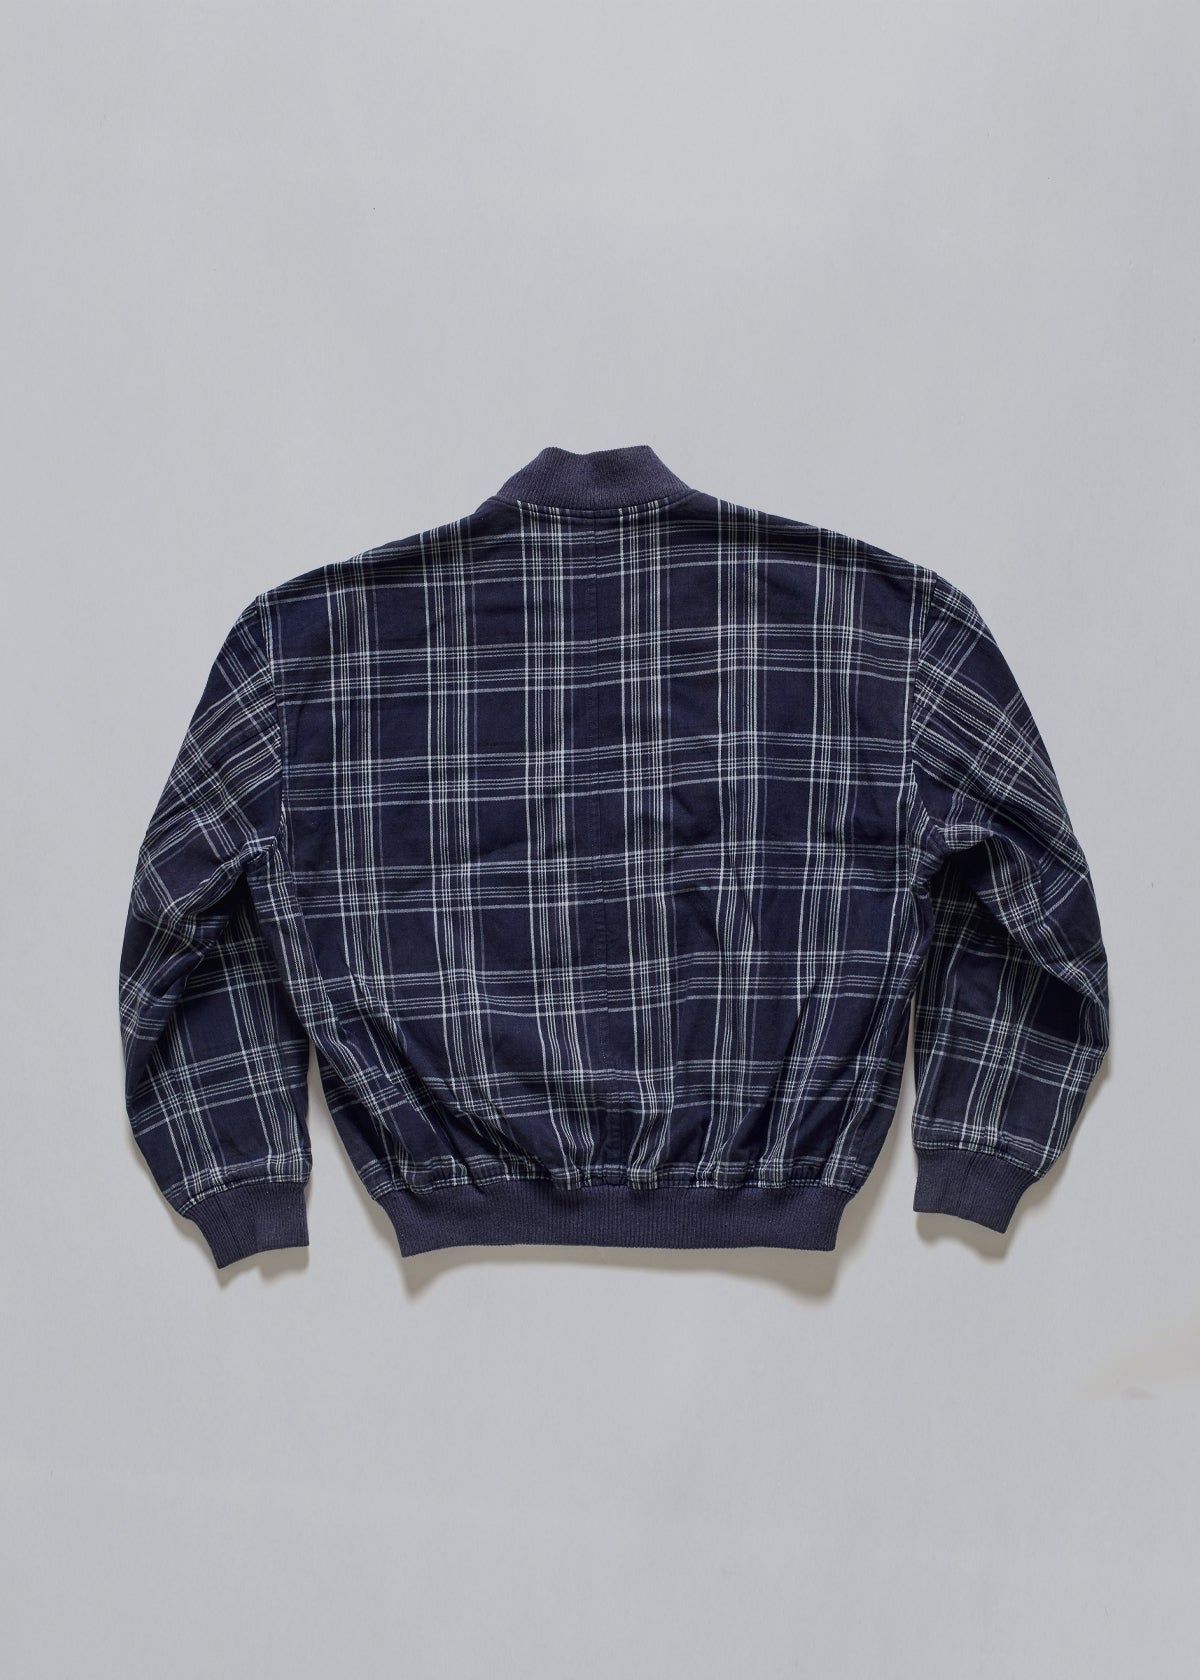 Homme Checkered Cotton Bomber Jacket 1980's - Medium - The Archivist Store